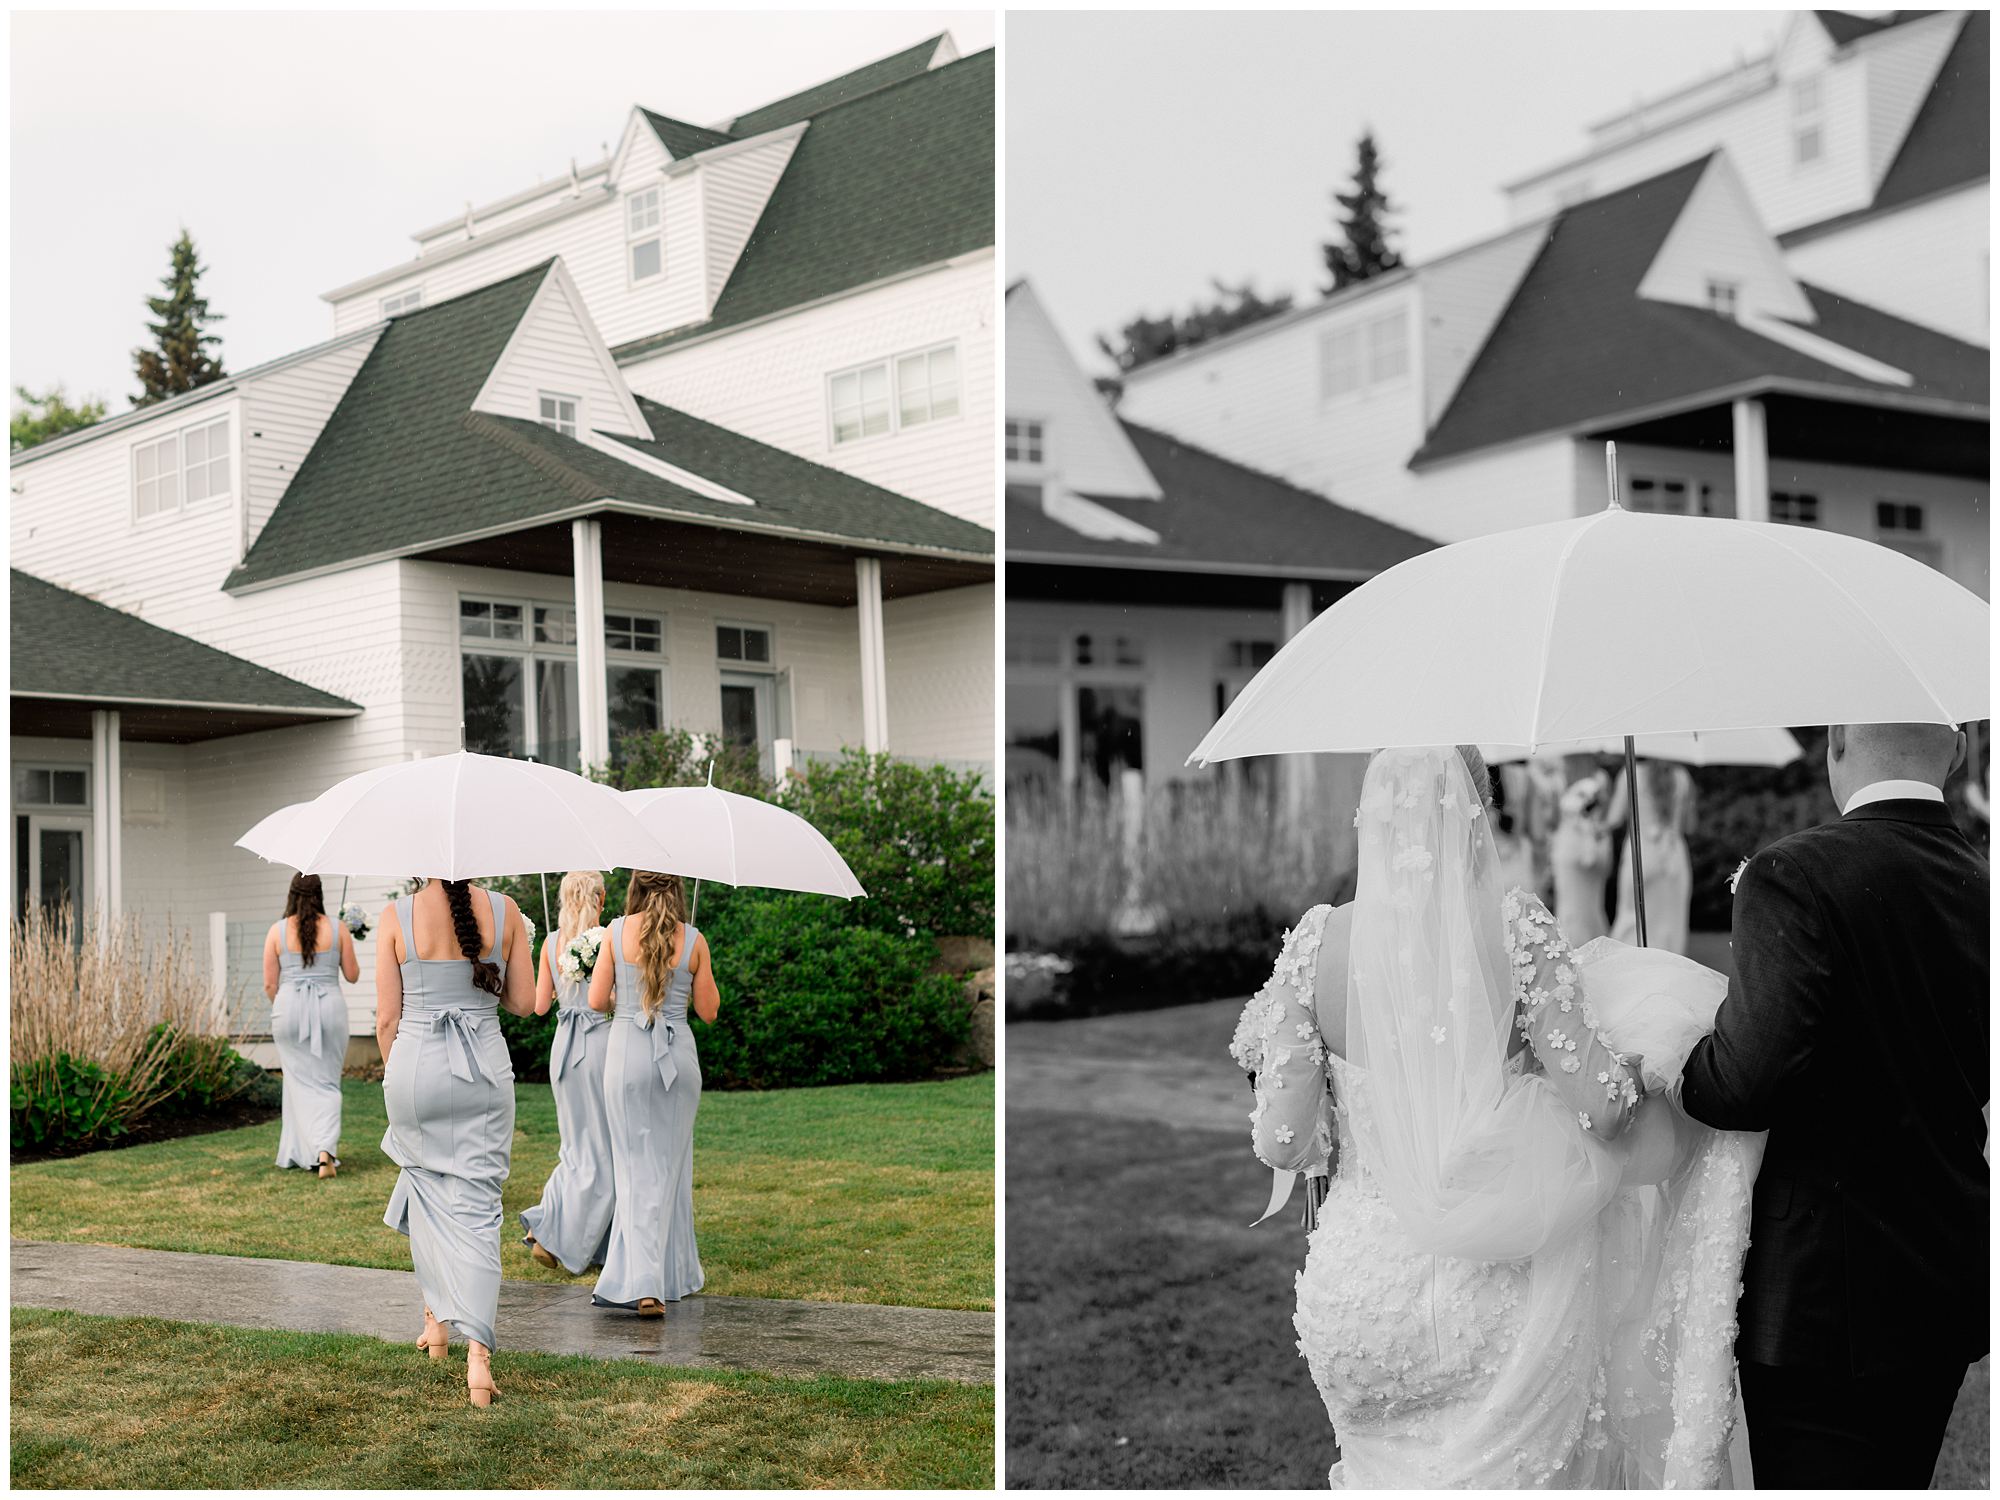 rainy day wedding candids at Viewpoint hotel in York Maine. Wedding Party walking with umbrellas.